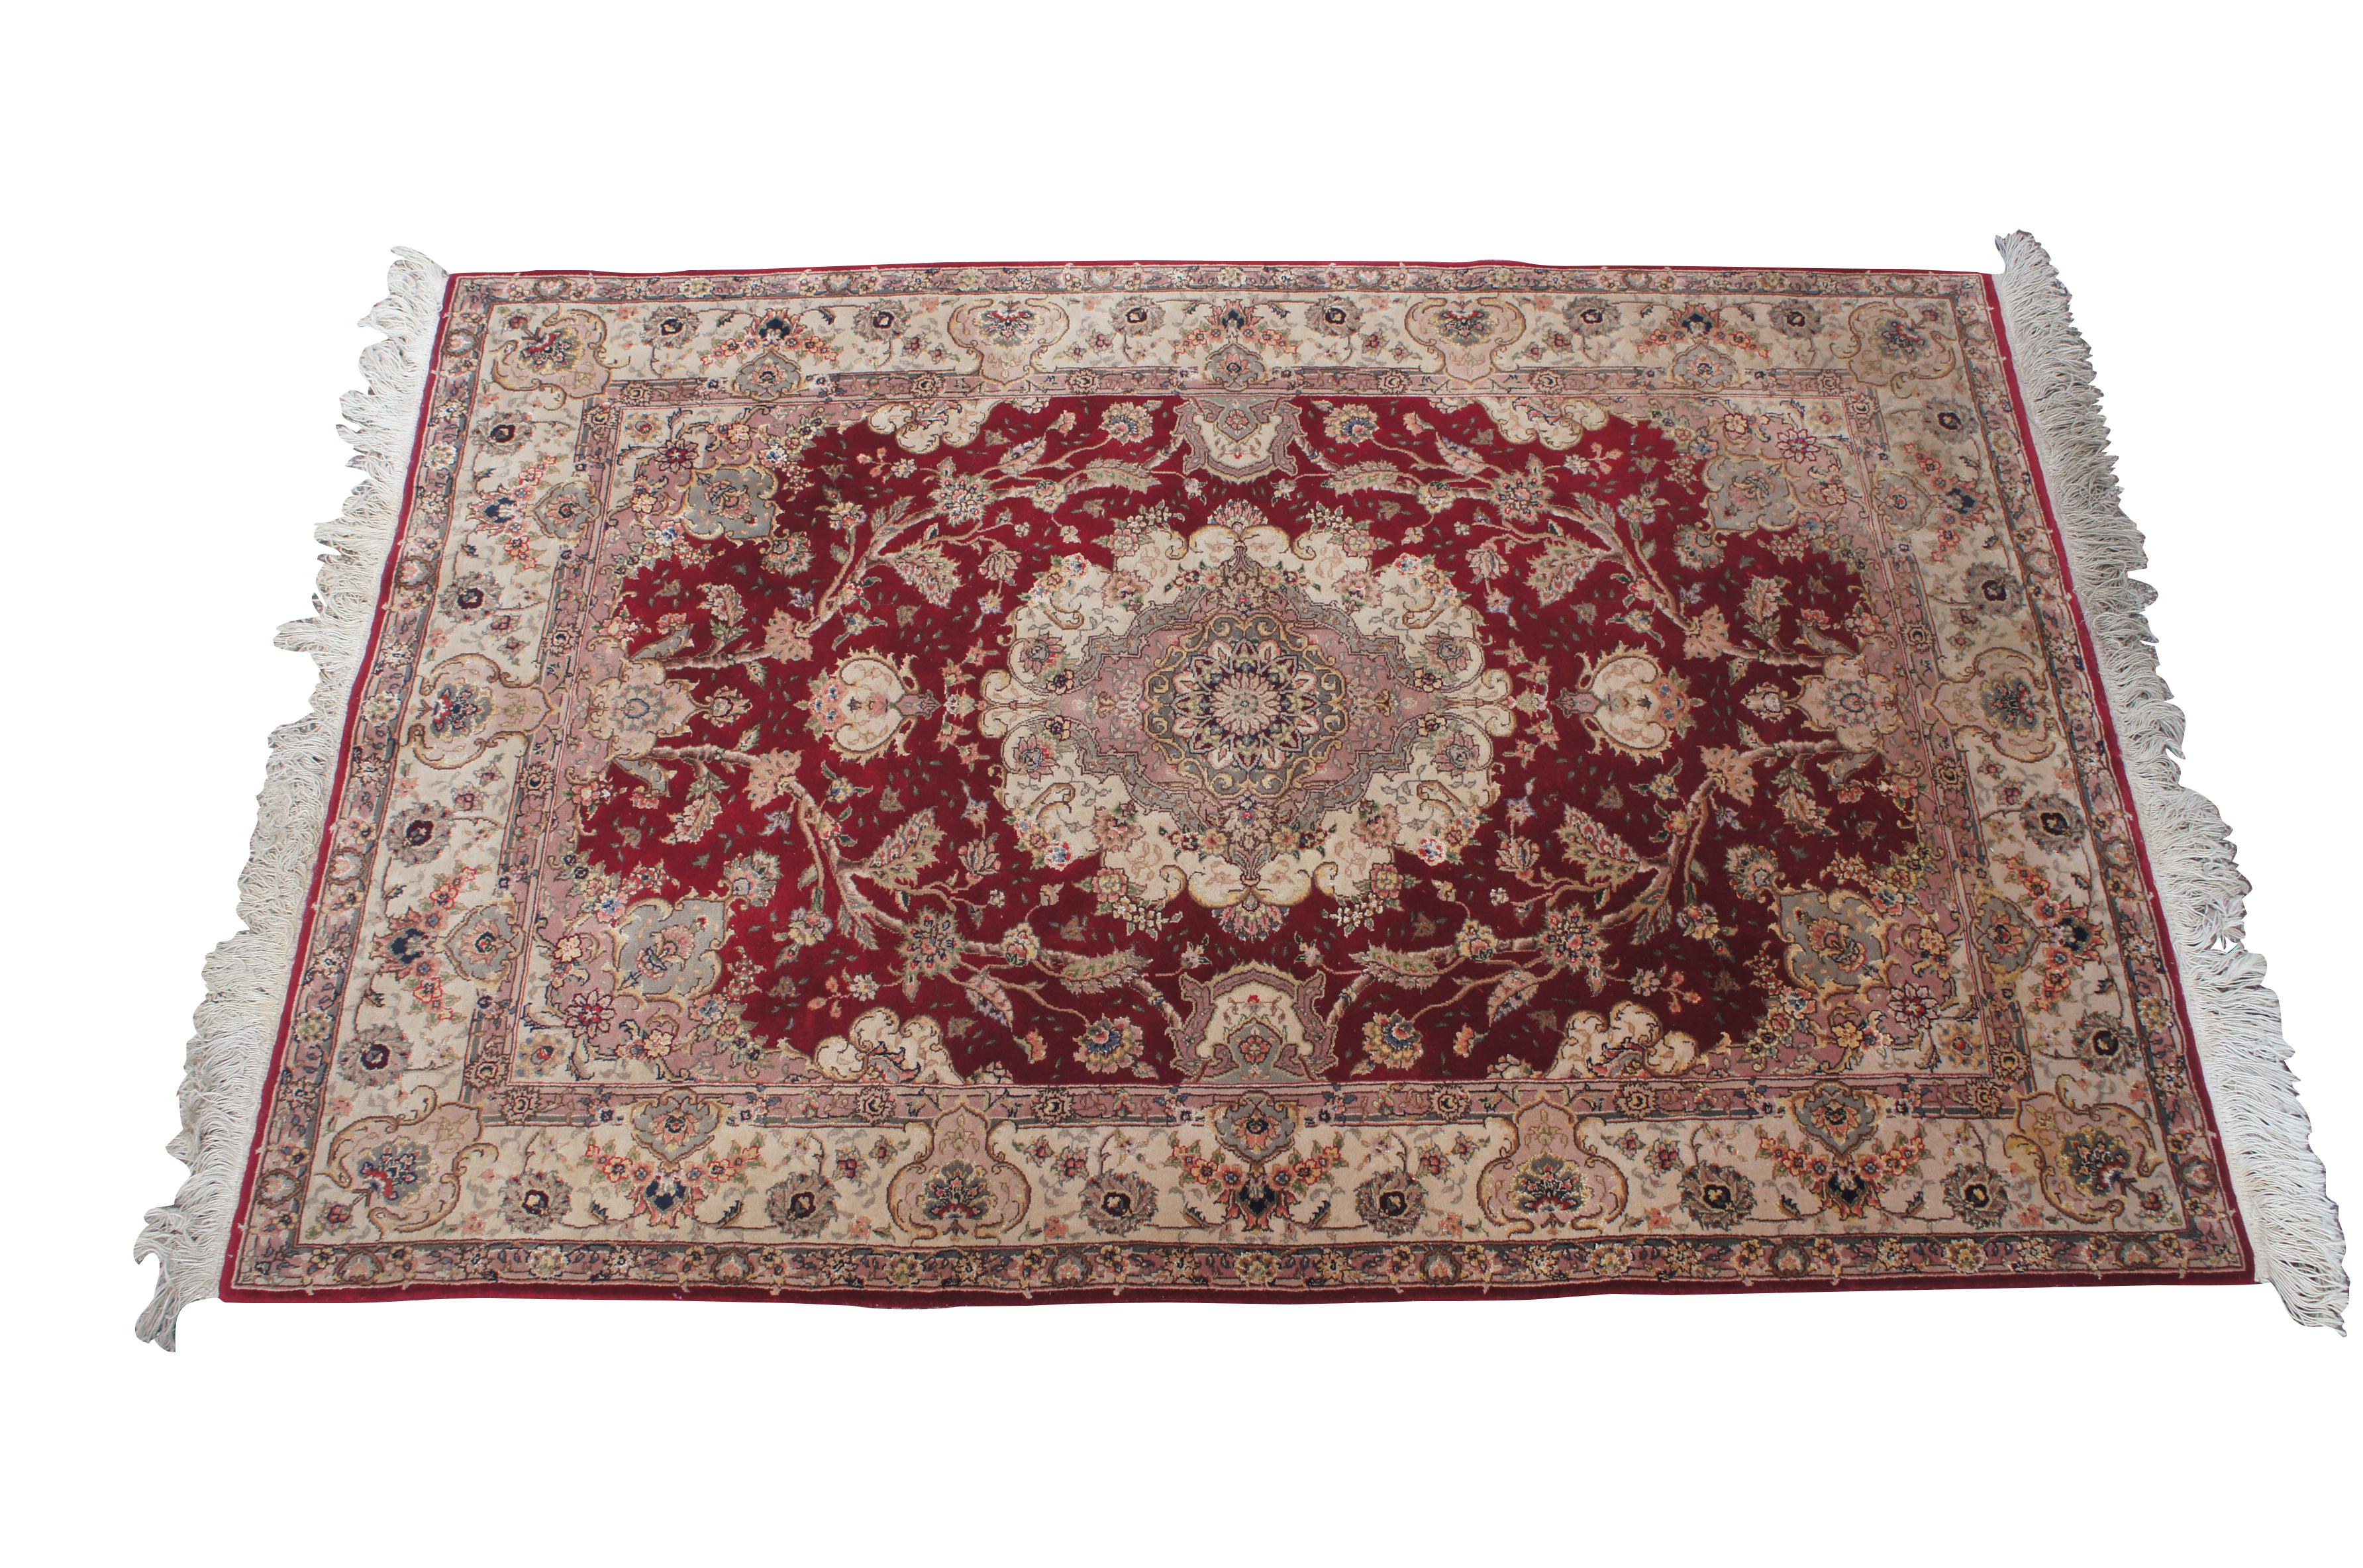 A genuine hand woven oriental Sino Tabriz area rug. Made from silk and wool with a red field showing beige and pink accents.  The vibrant geometric medallion is surrounded by elegant floral sprays.  256 knots per square inch

Sino Tabriz rugs are